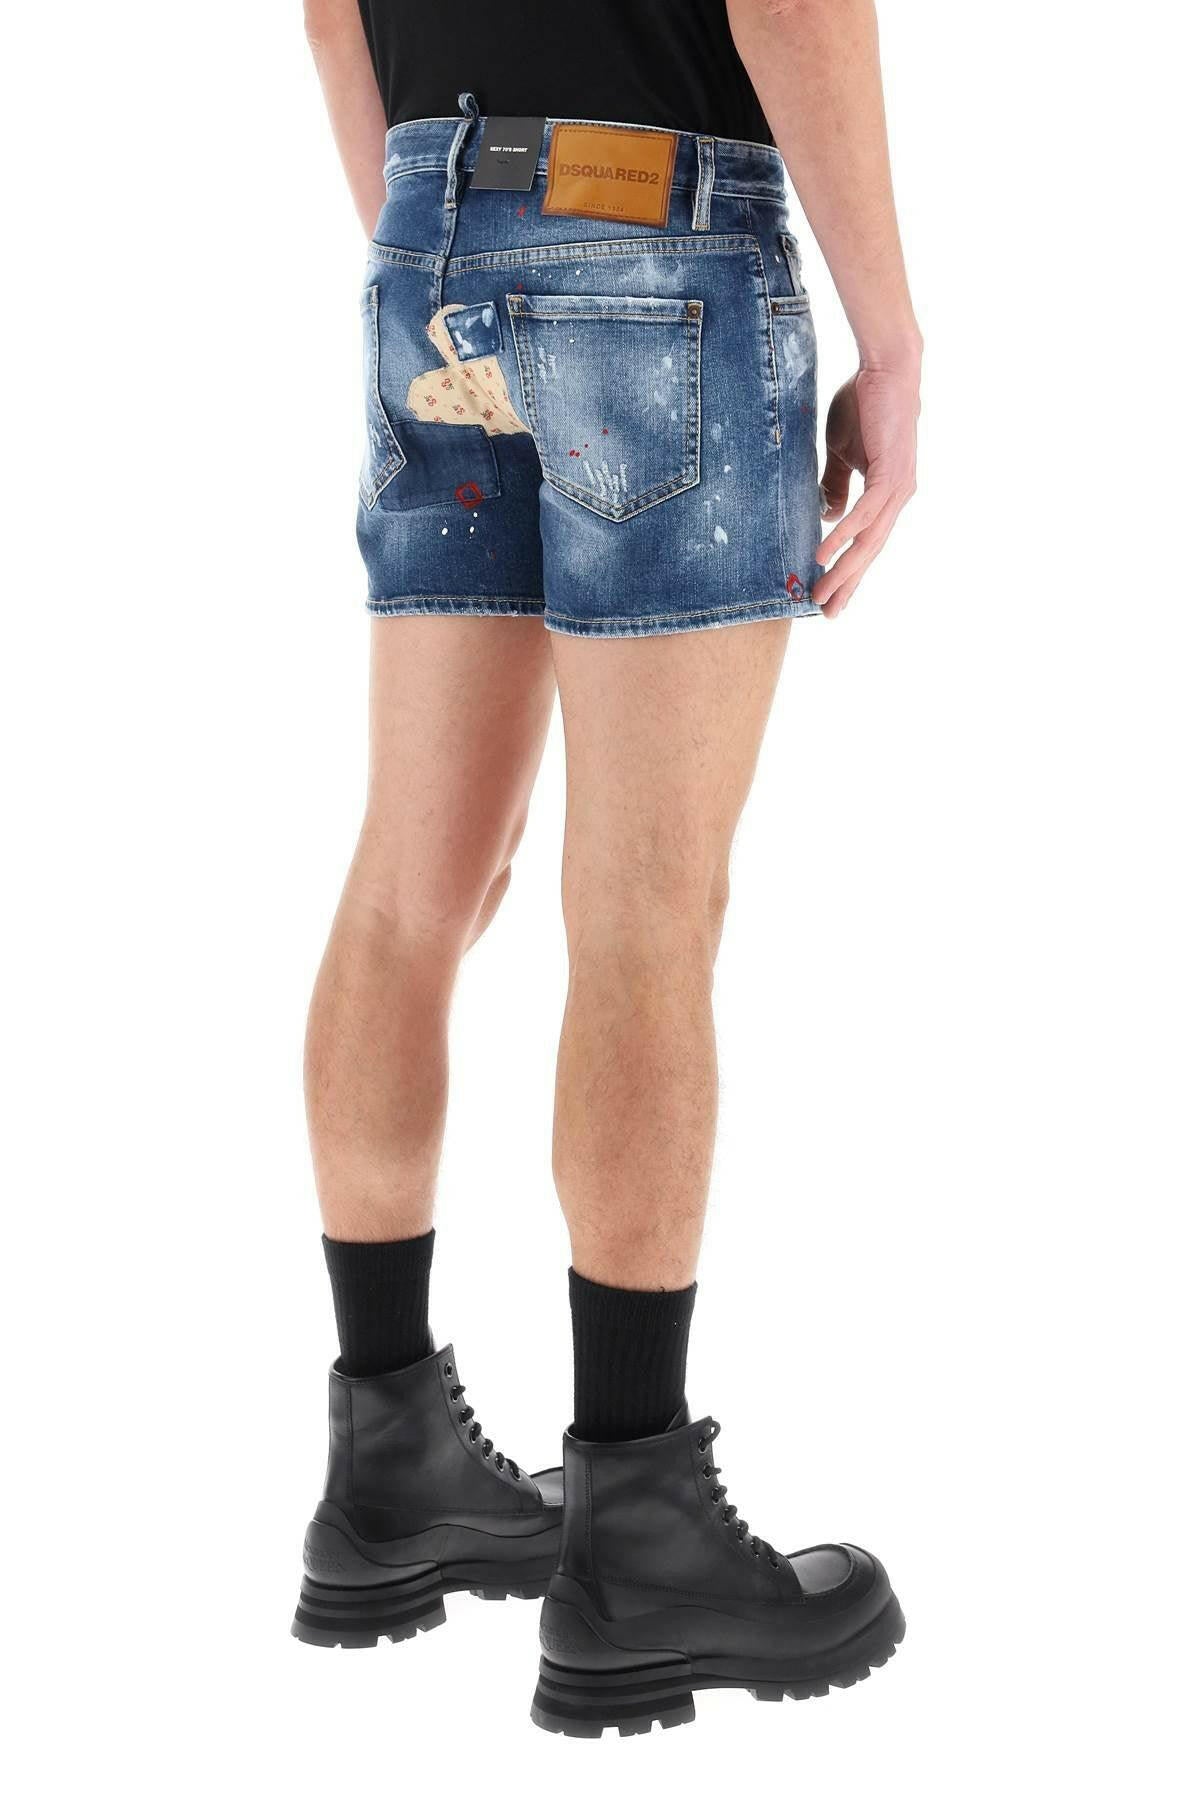 Dsquared2 Sexy 70's Shorts In Worn Out Booty Denim - JOHN JULIA